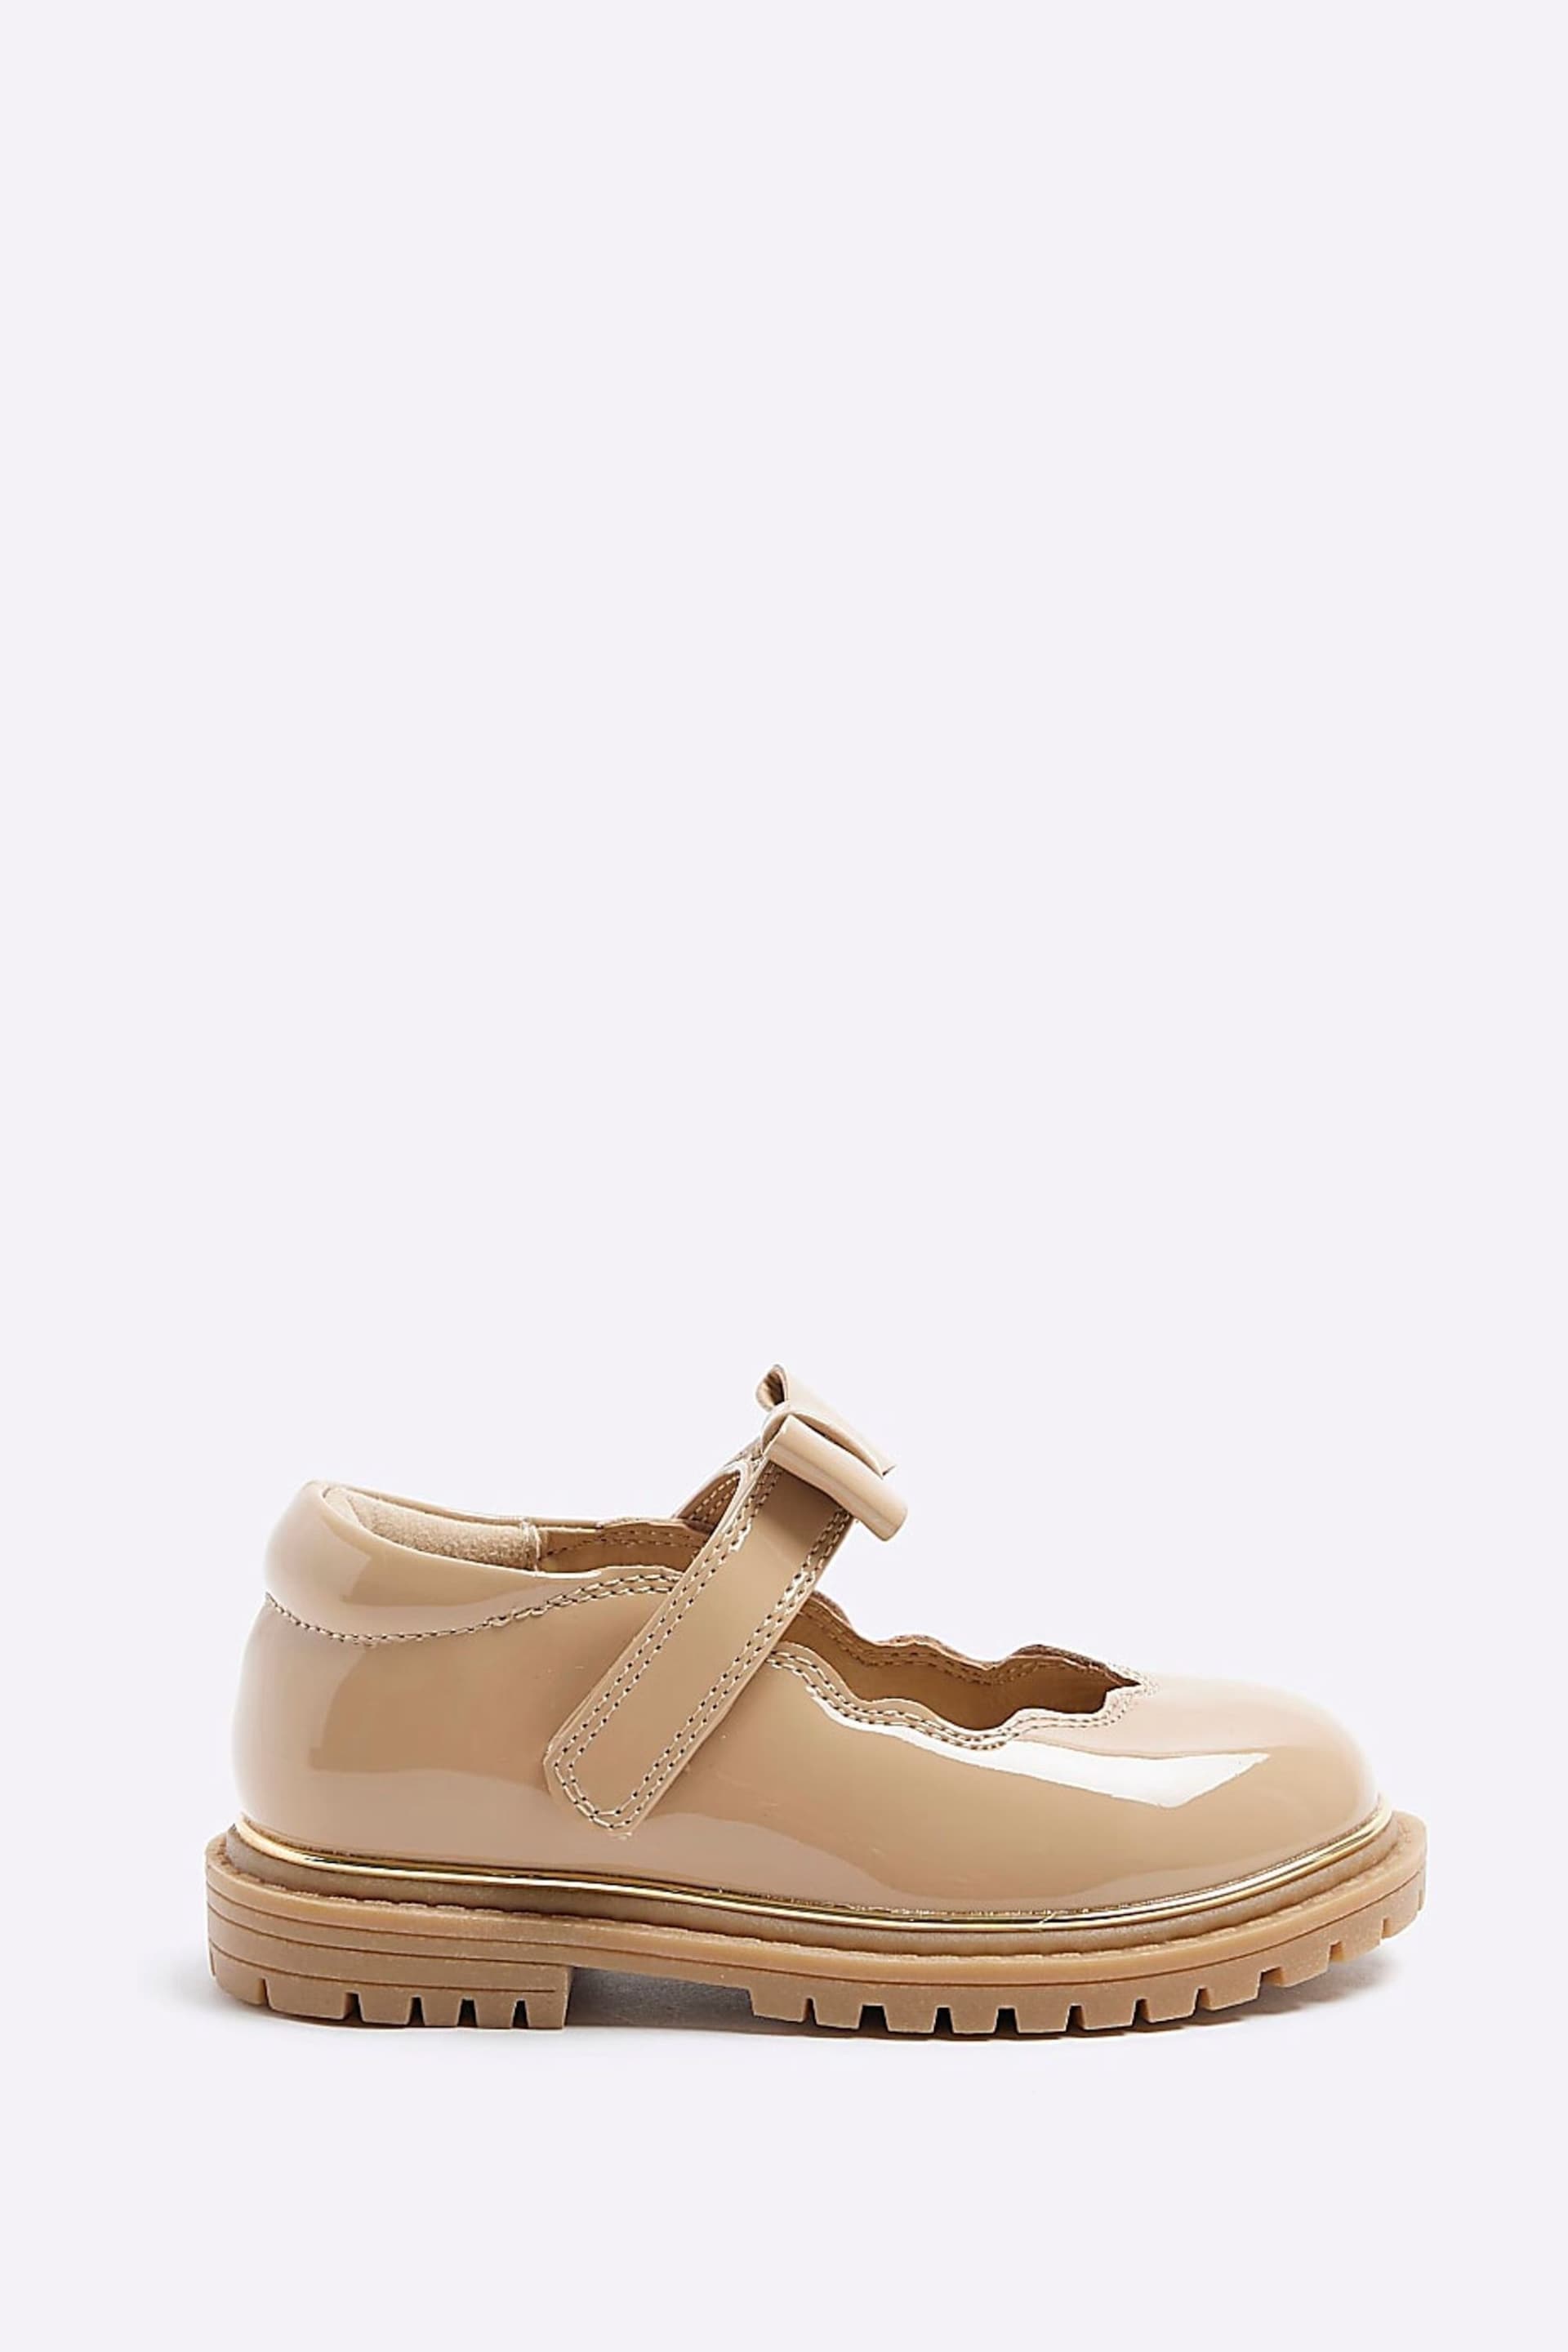 River Island Brown Girls Scallop Bow Mary Jane Shoes - Image 1 of 5